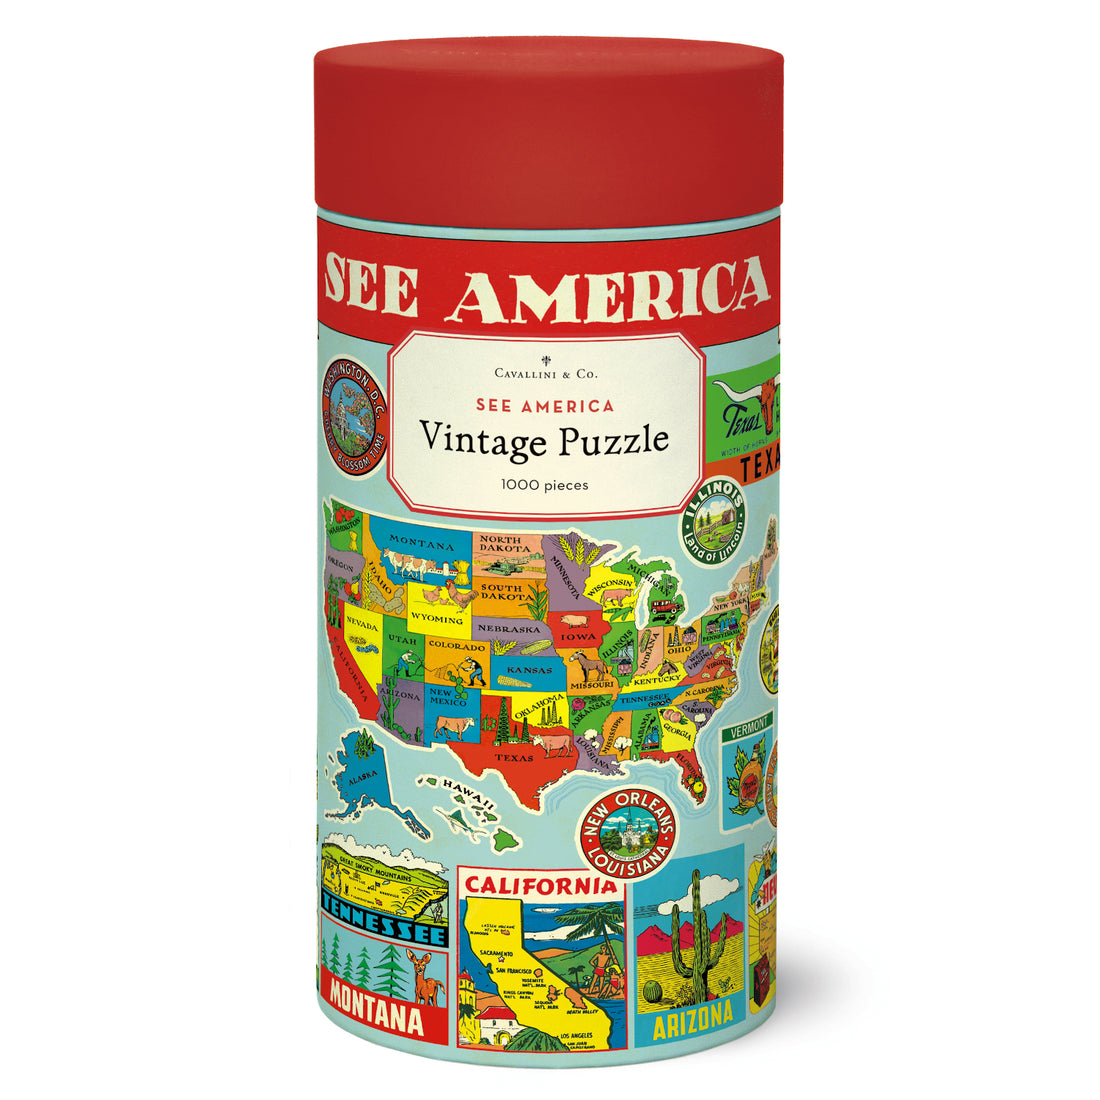 A round red and white See America Puzzle container with a map of the United States, featuring vintage illustrations by Cavallini Papers &amp; Co.